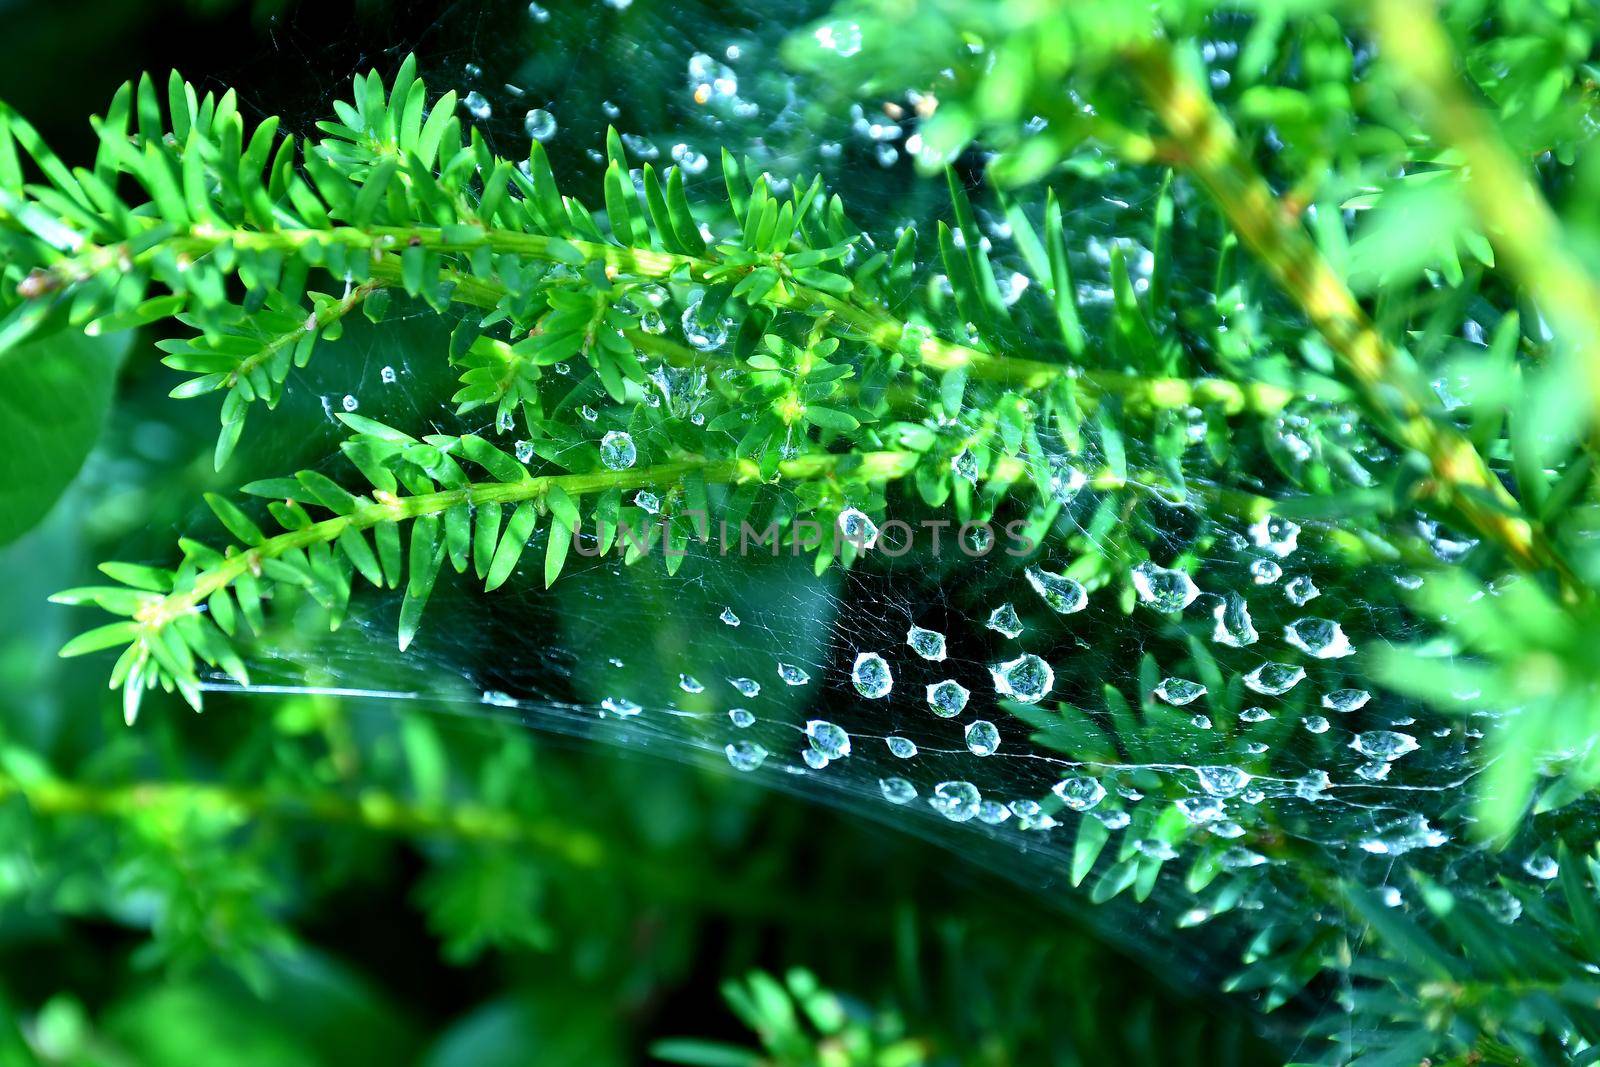 spider web with raindrops on a bush